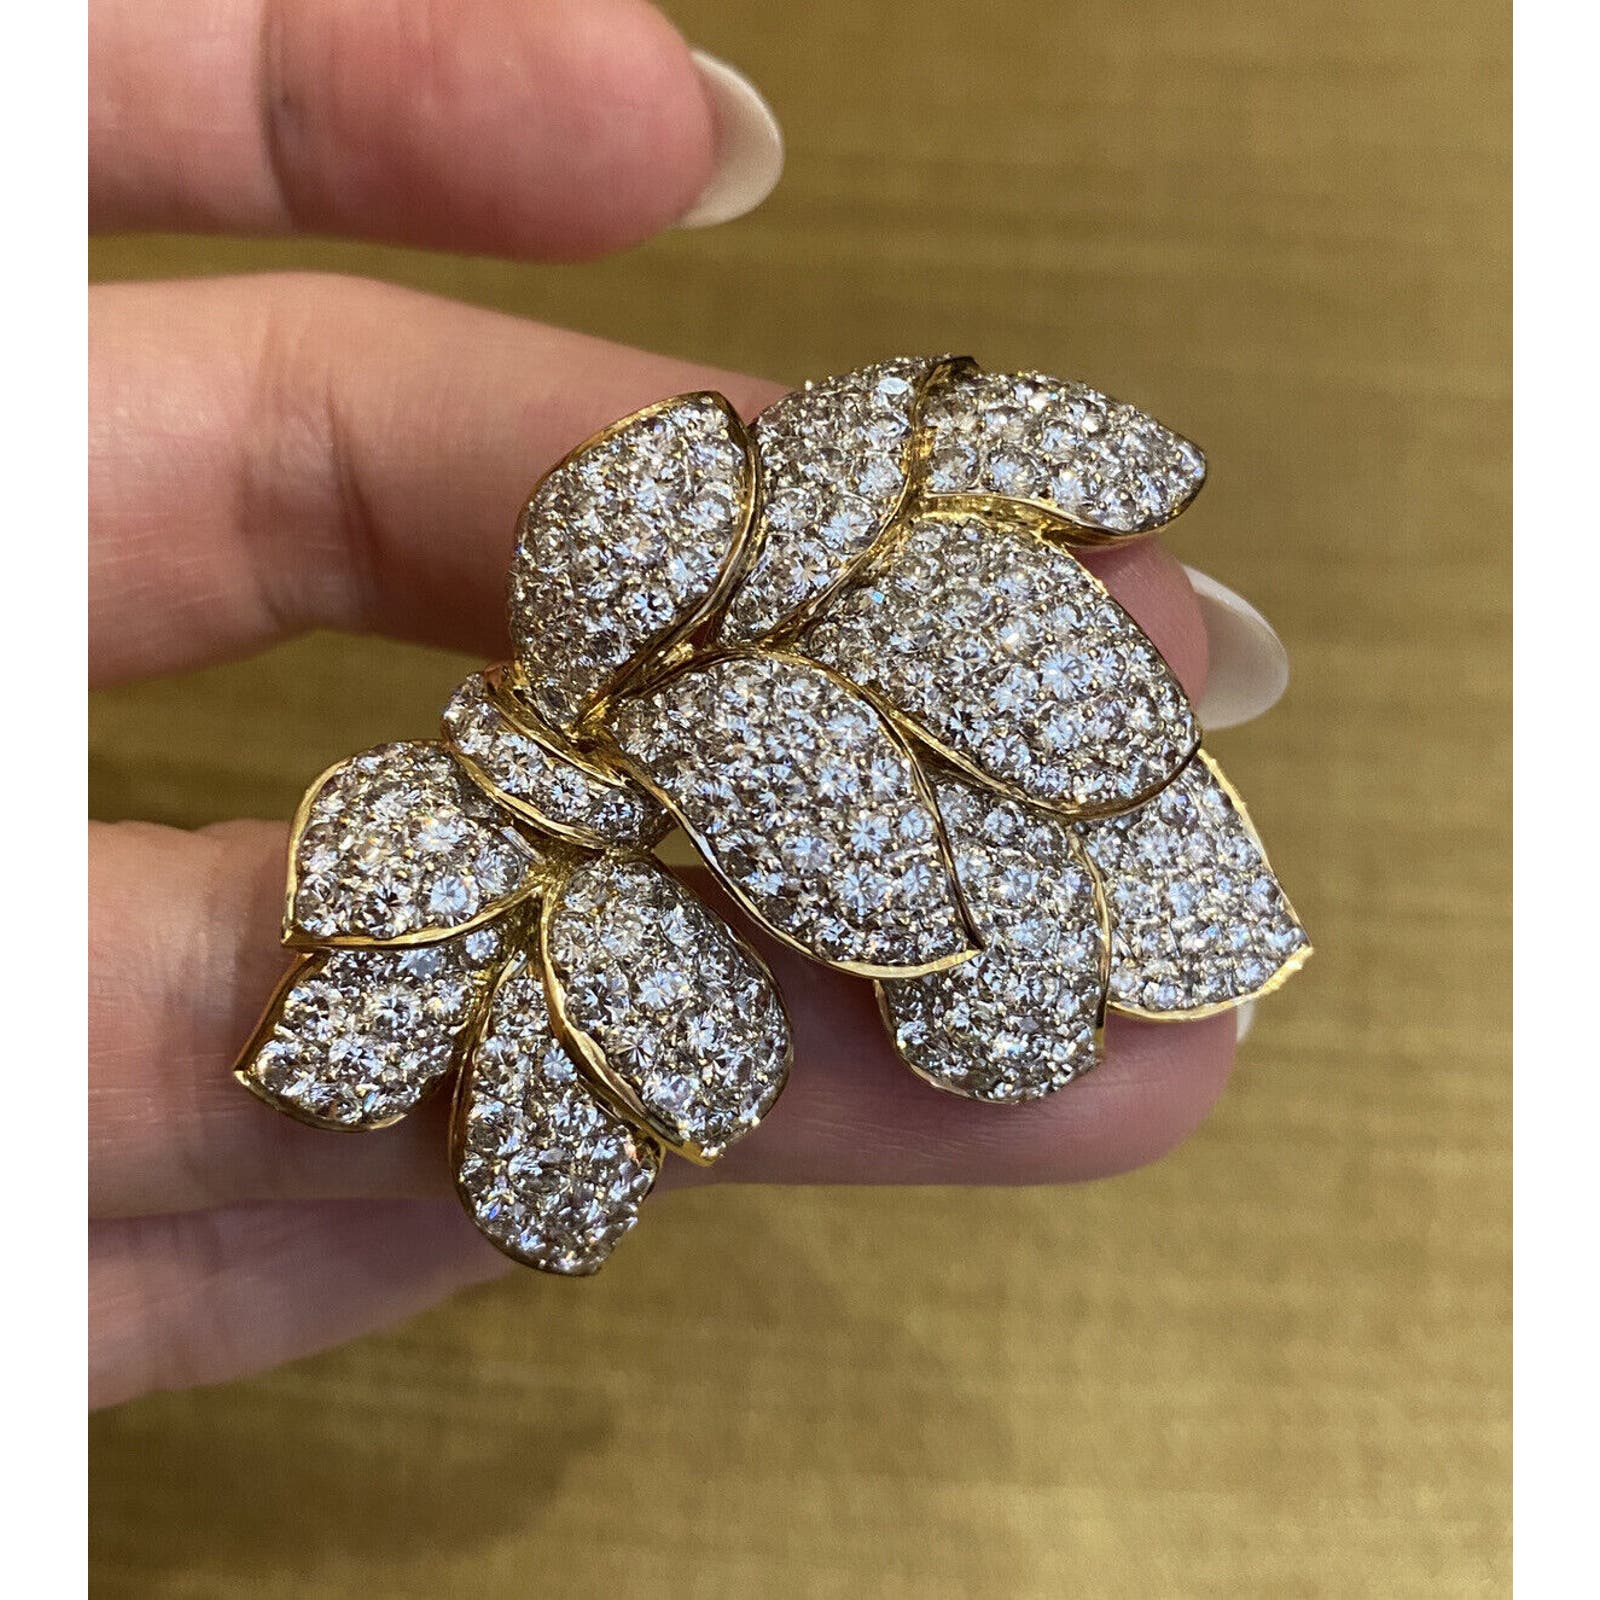 Pave Diamond Floral Spray Pin Brooch 10.86 cttw in 18k Yellow Gold - HM2306E